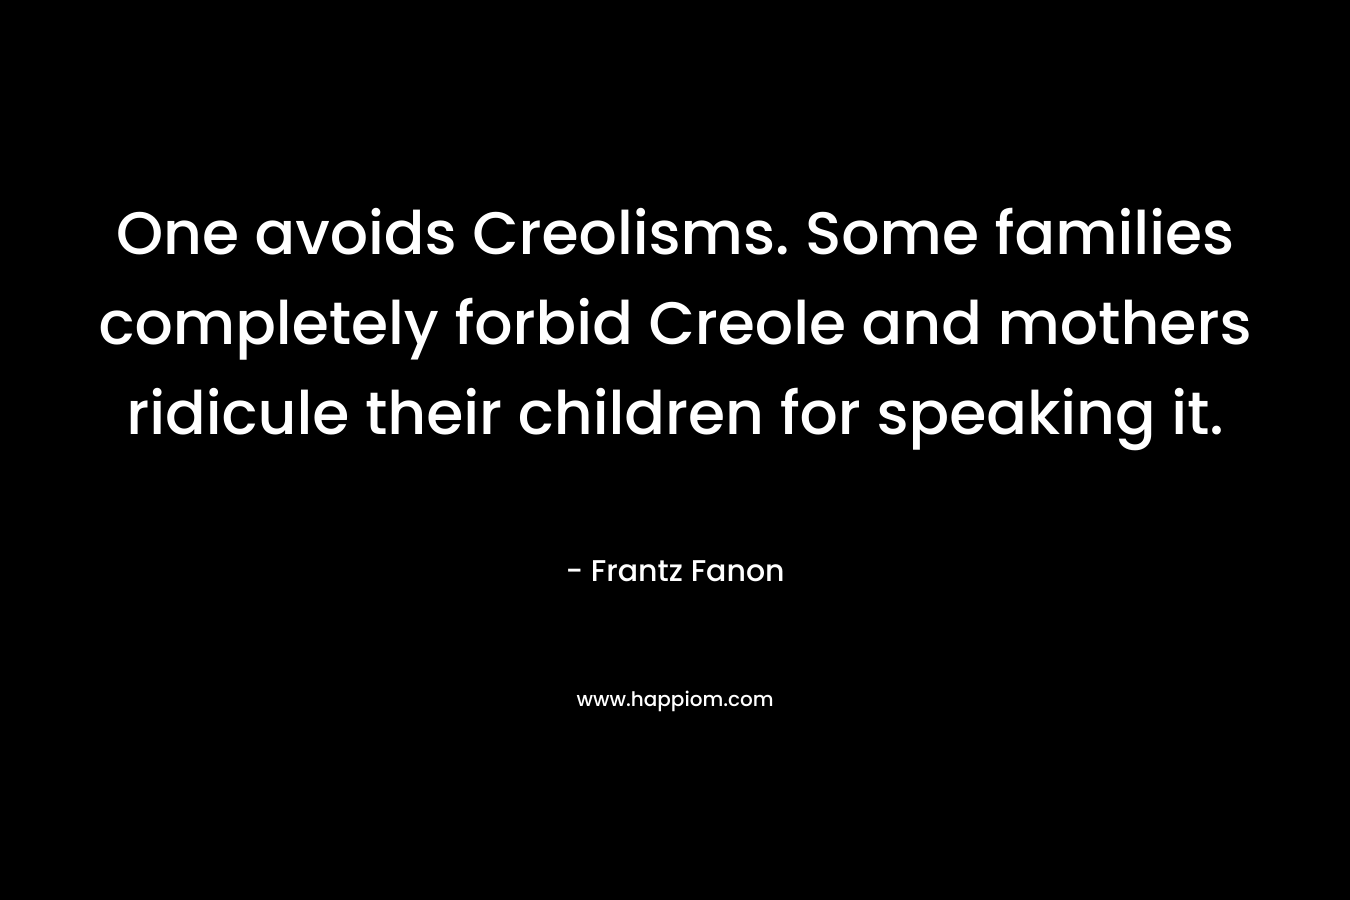 One avoids Creolisms. Some families completely forbid Creole and mothers ridicule their children for speaking it. – Frantz Fanon